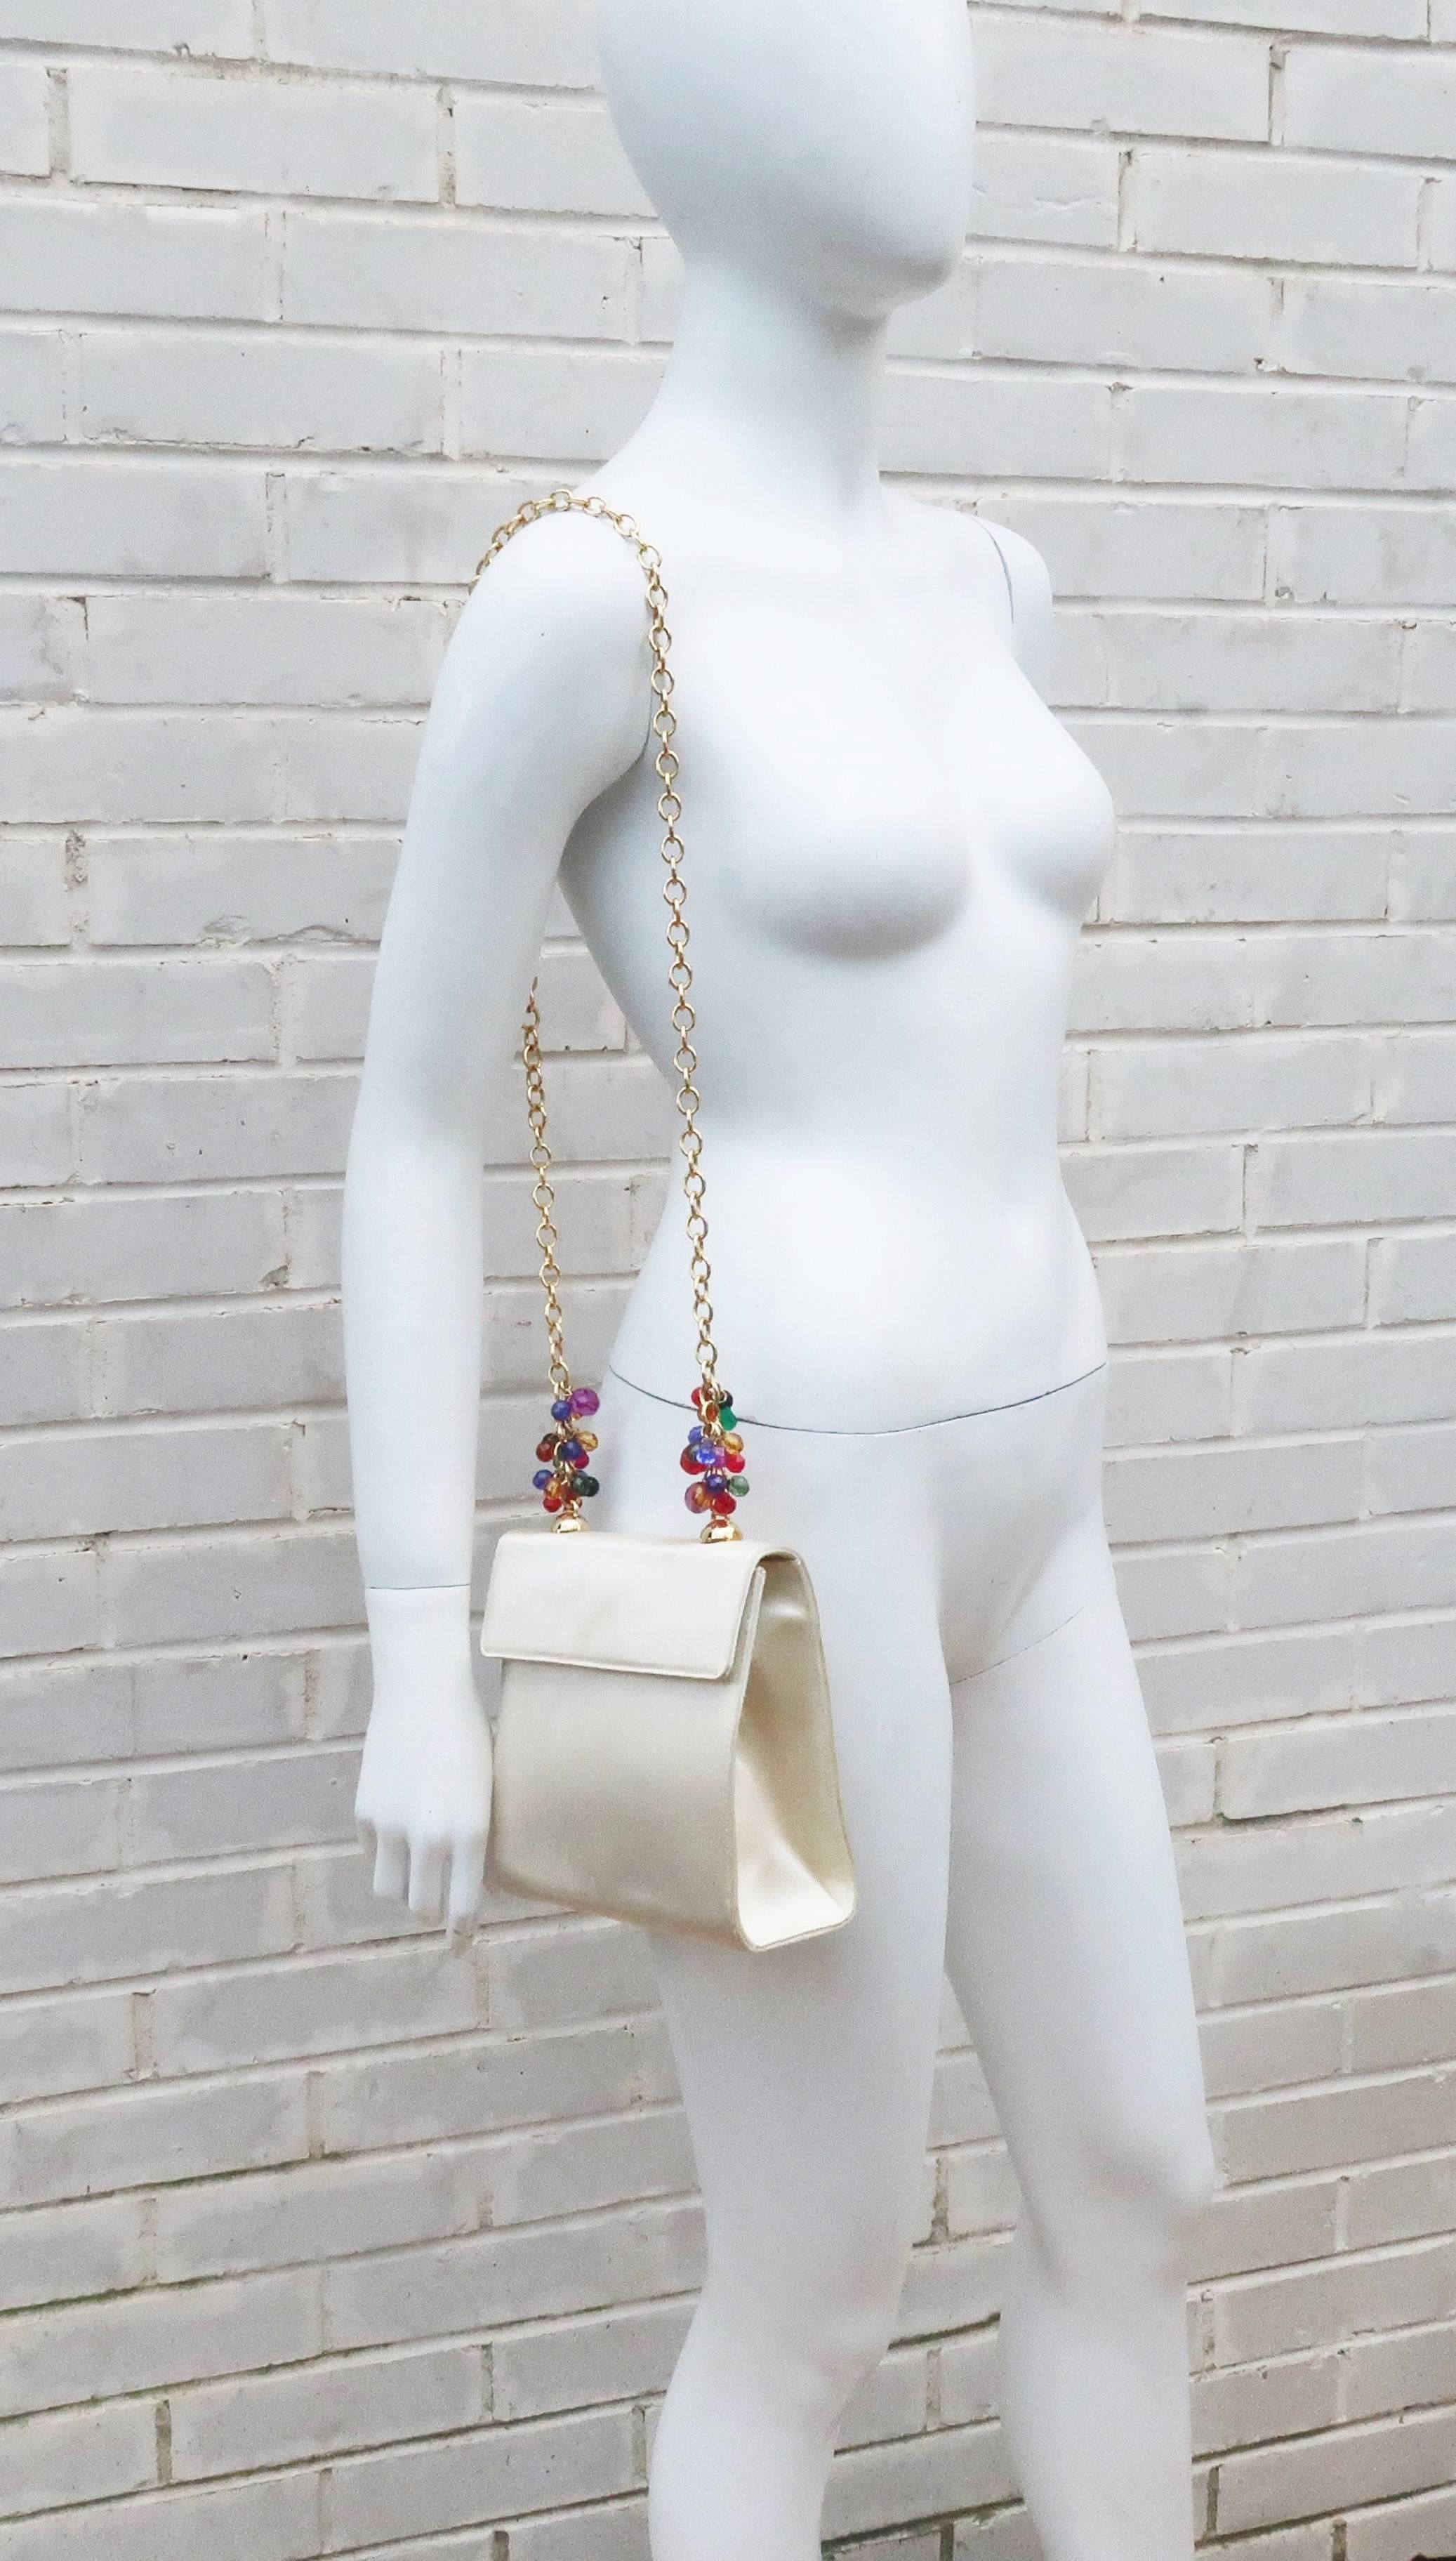 Charming ... in more ways than one!  This Italian creamy white satin handbag designed for Neiman Marcus has a gold chain shoulder handle decorated with faceted plastic charms in various shapes and colors.  The charms are akin to fruit on the vine